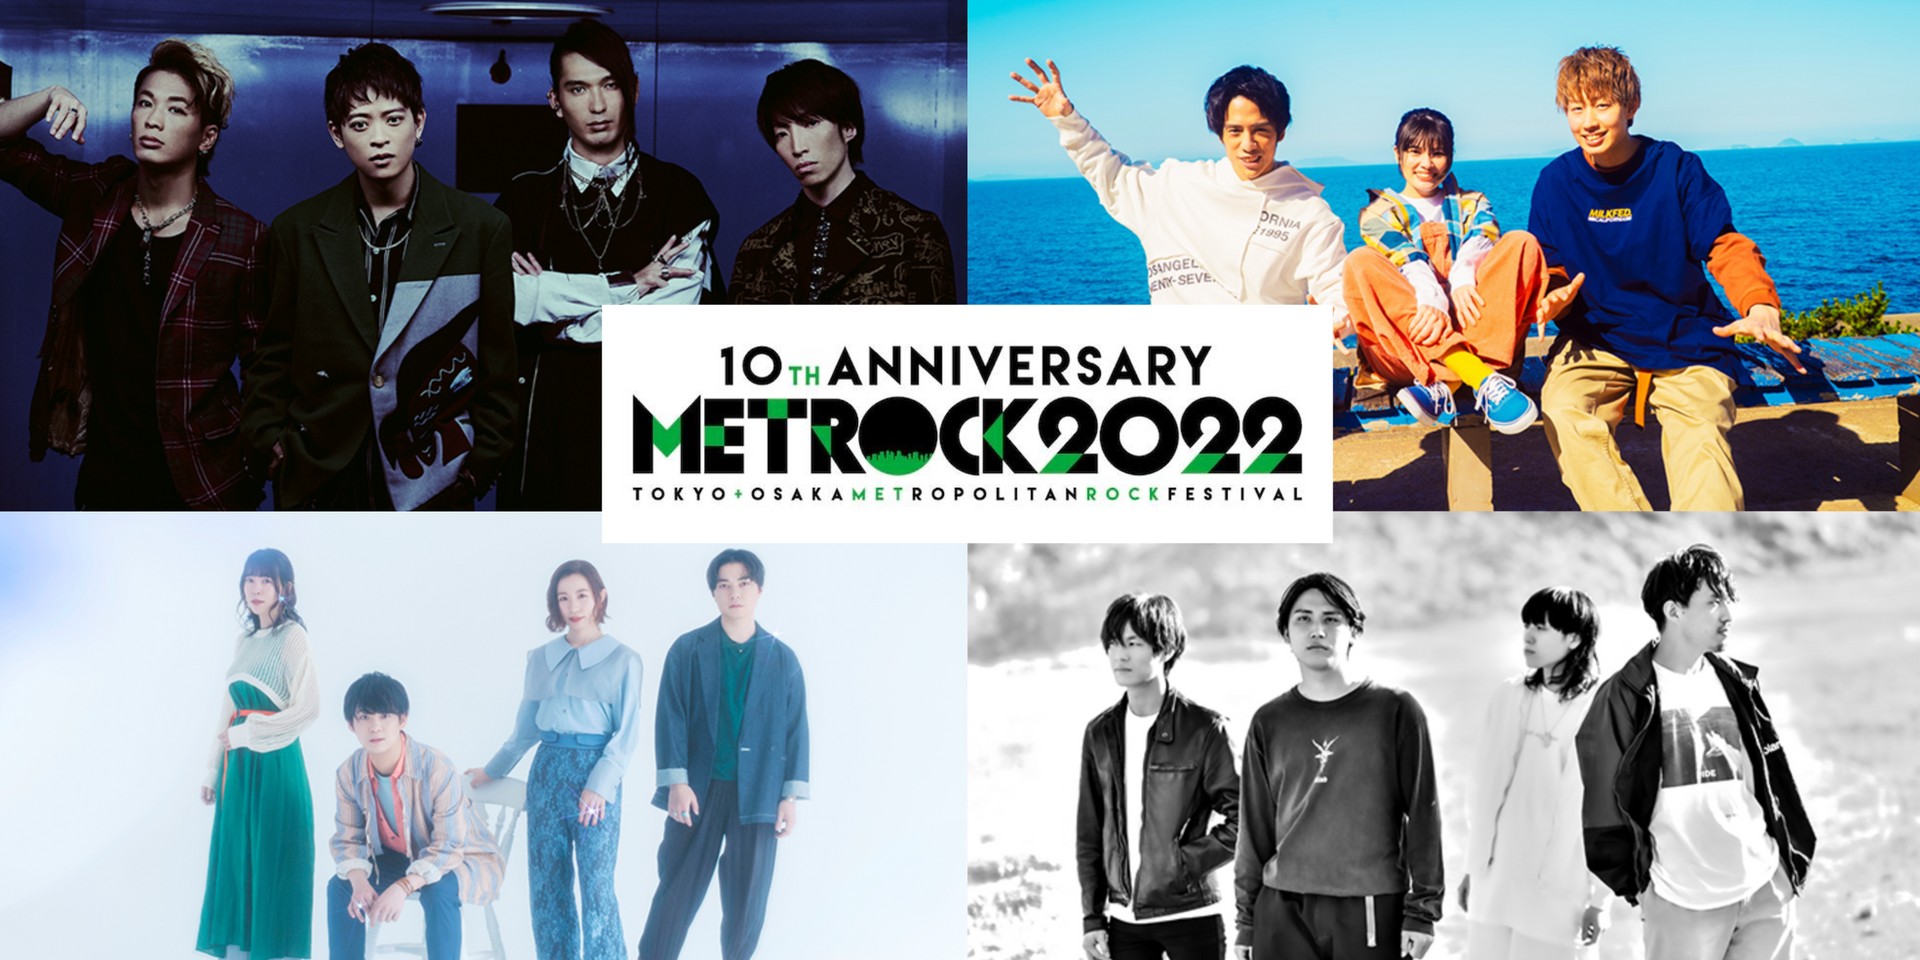 METROCK Festival announces lineup for 2022, featuring THE ORAL CIGARETTES, KOTORI, Ivy Color, LONGMAN, and more